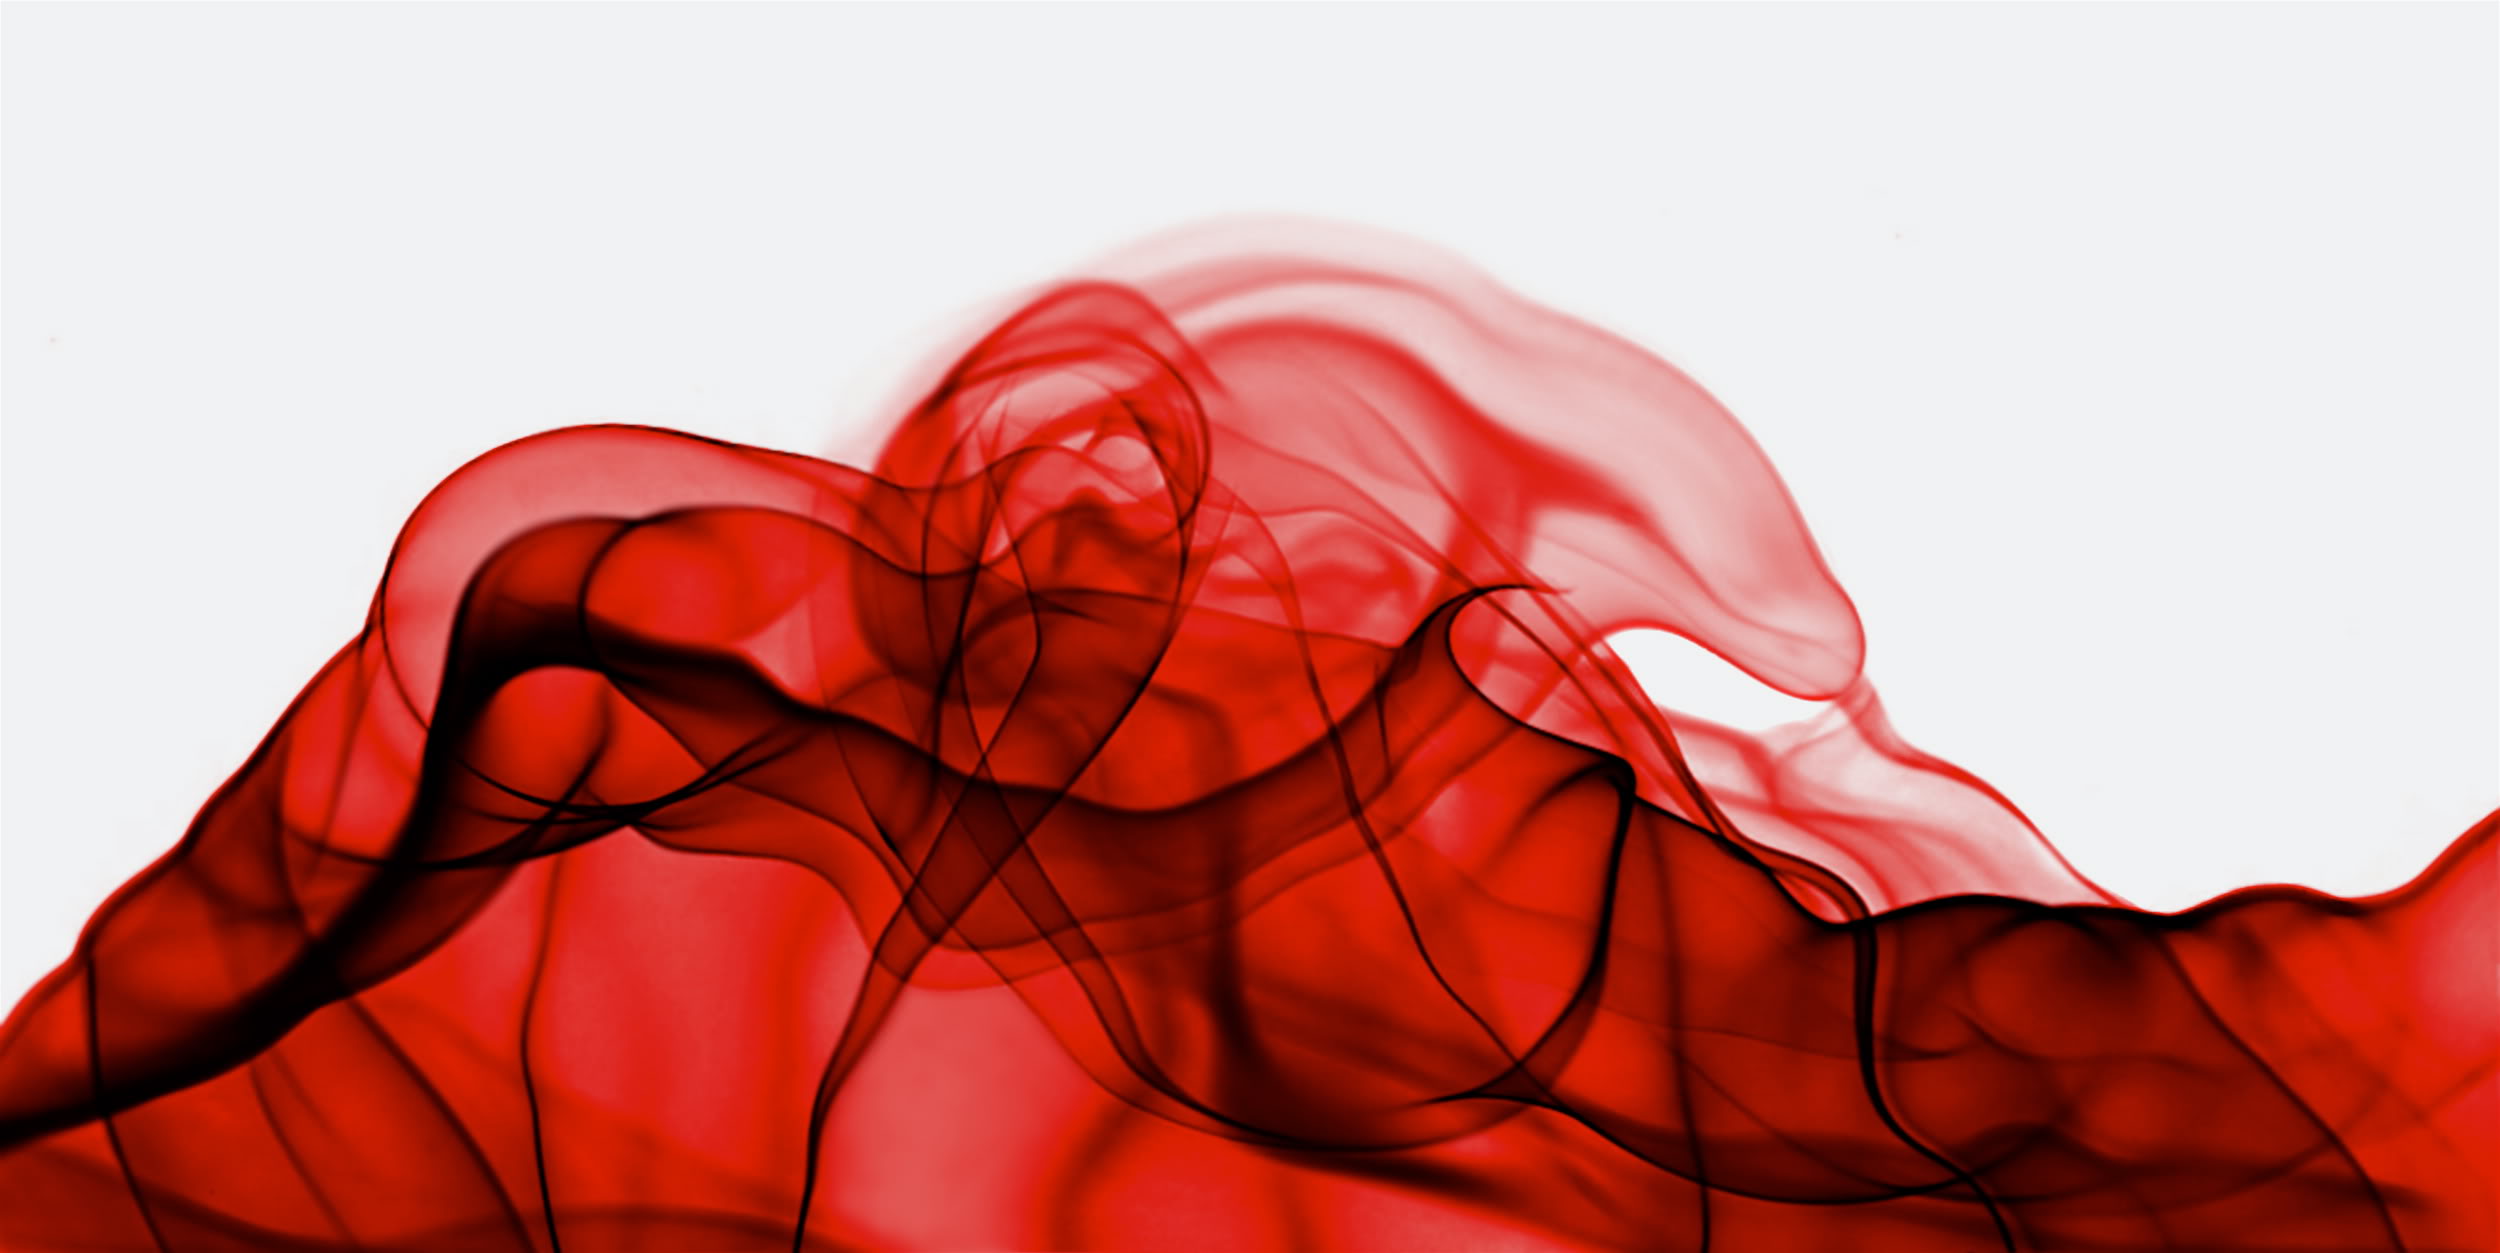 Wallpapers Of The Day: Red Smoke | 2500x1253 Red Smoke Backgrounds